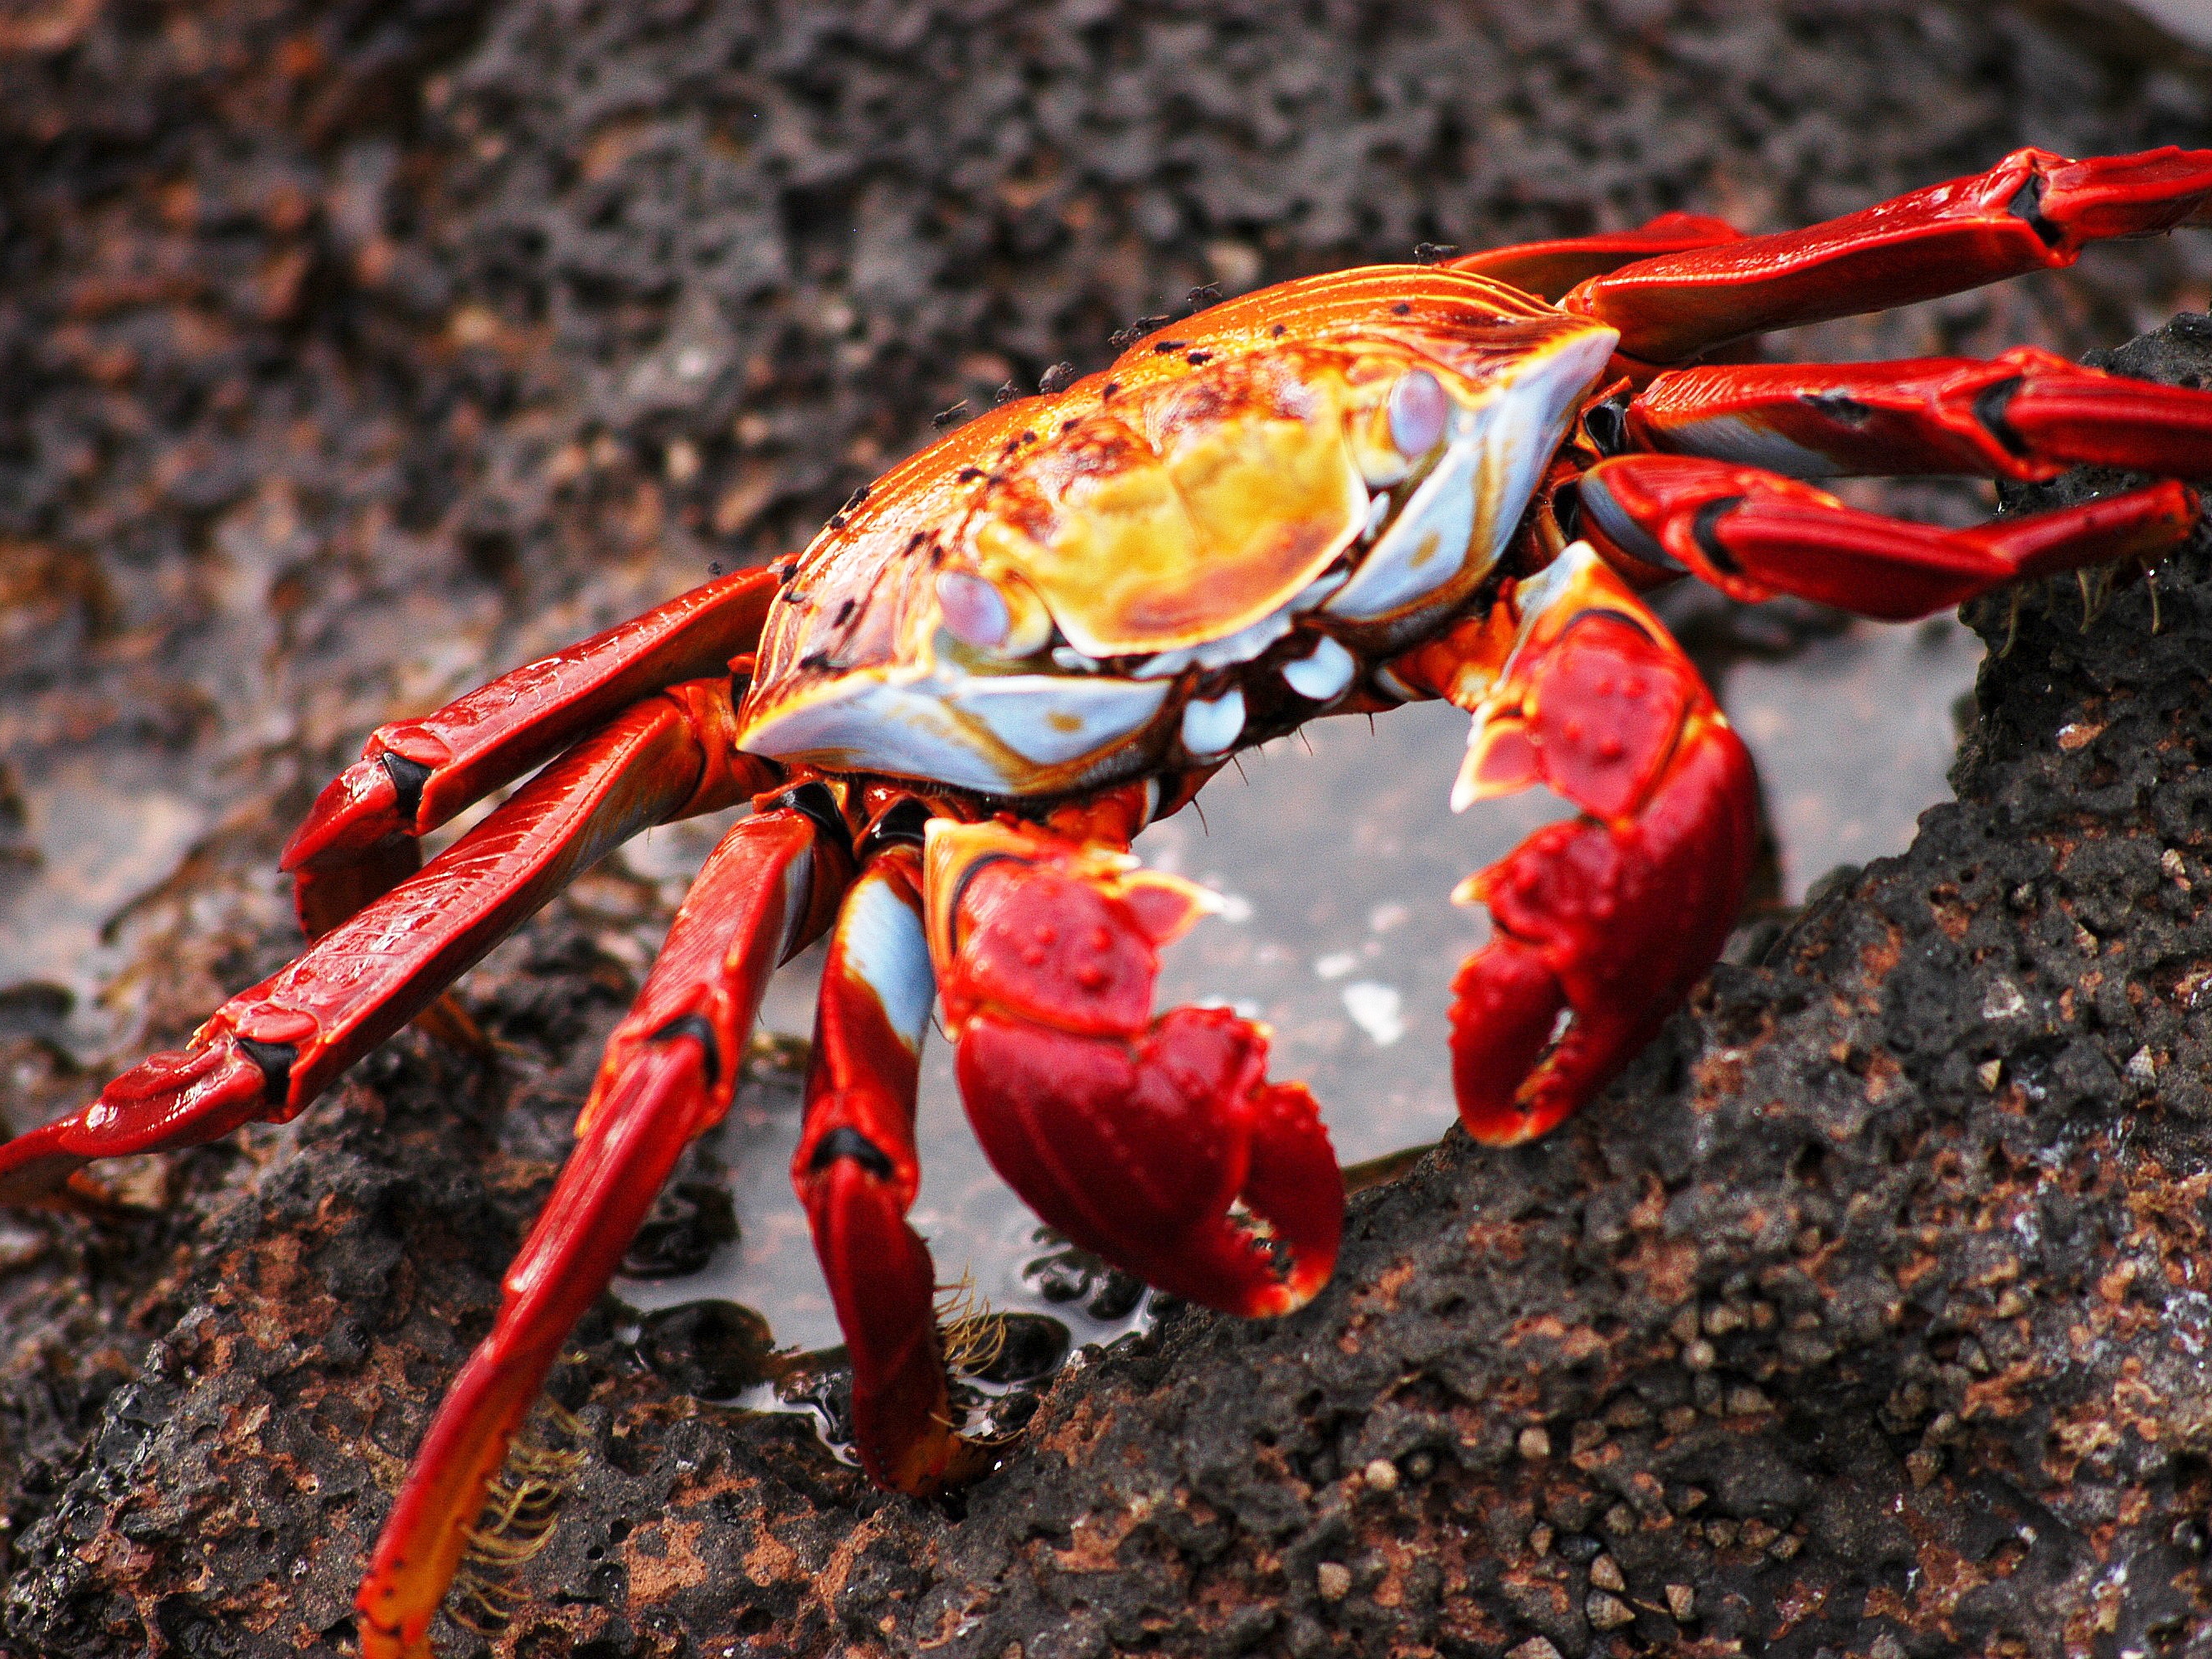 Sally Lightfoot Crab - Endangered Species in the Galapagos